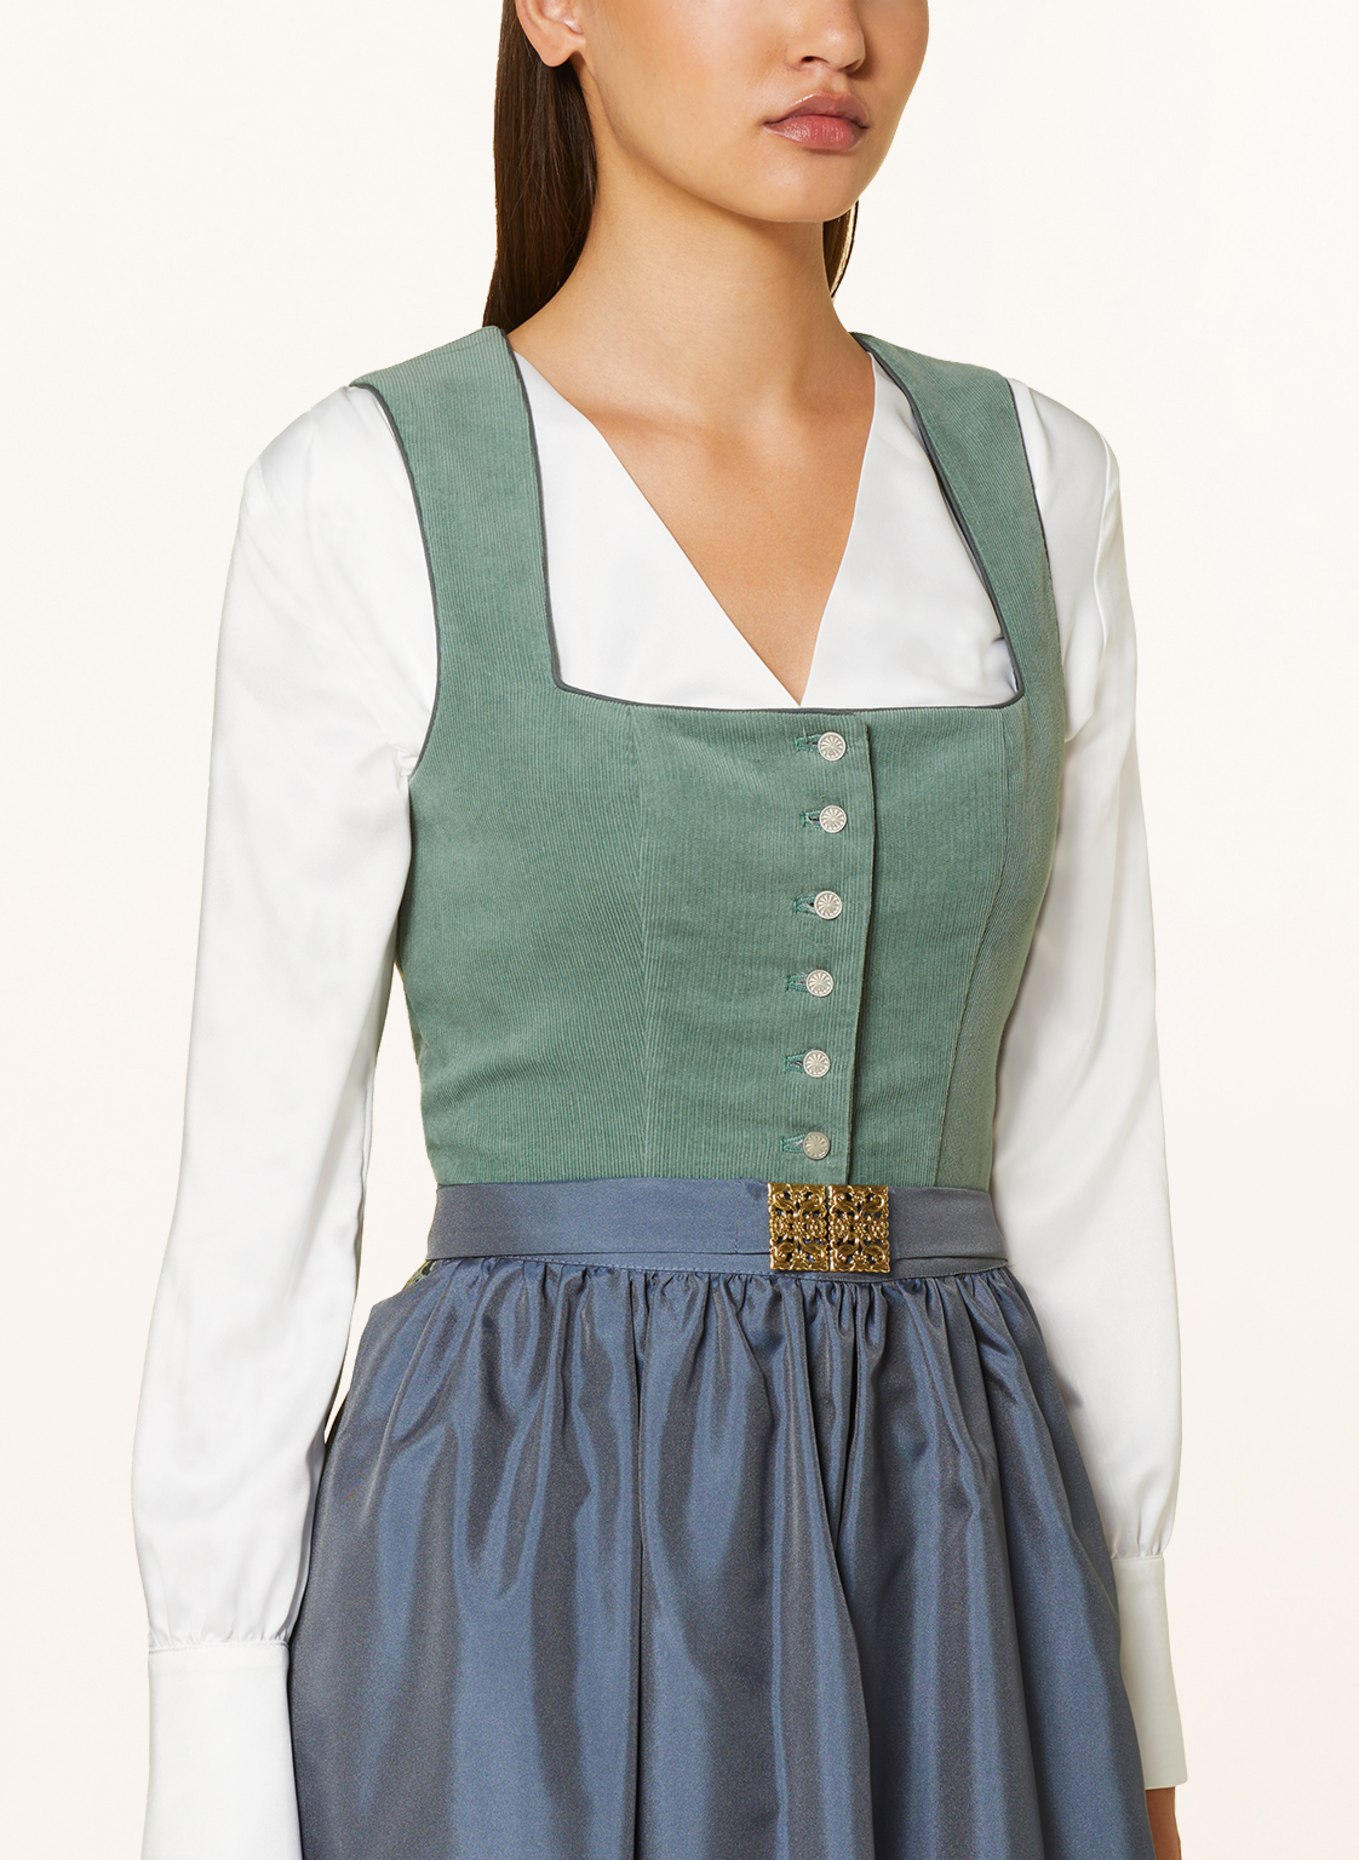 LIMBERRY Dirndl blouse made of satin, Color: WHITE (Image 3)